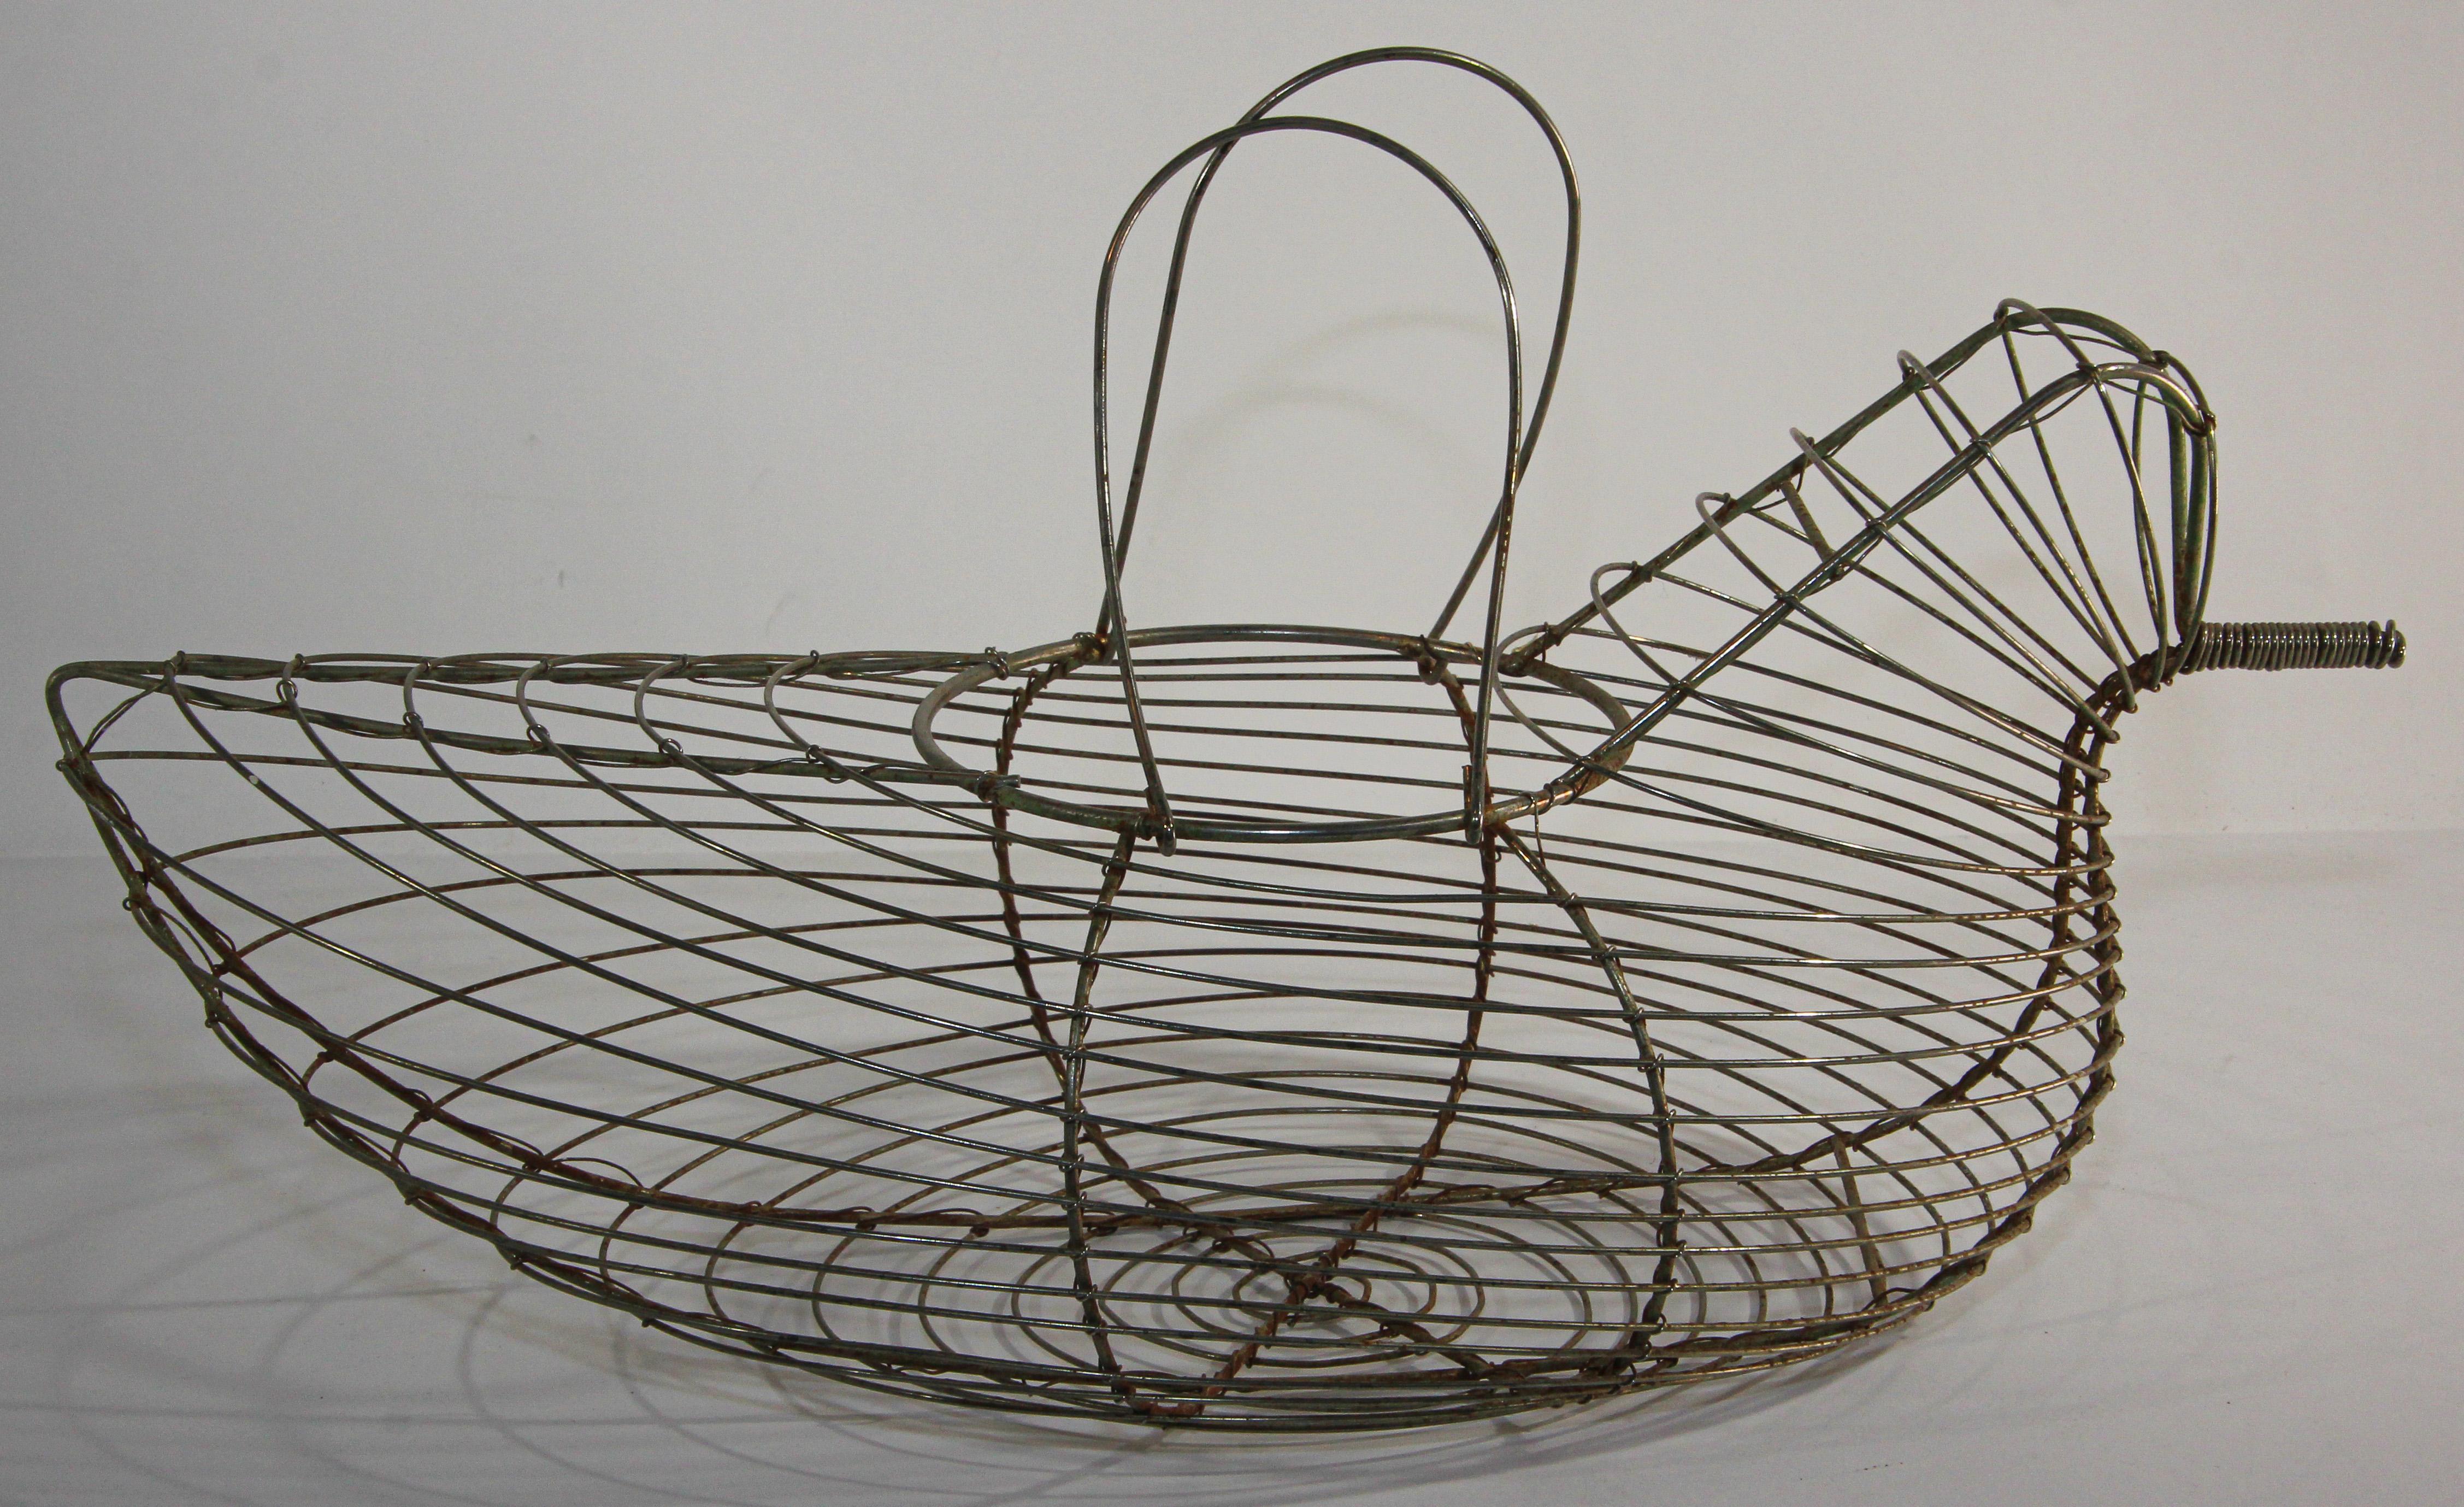 1970s or earlier vintage wire hen or chicken shaped egg basket.
Great for displaying farm fresh eggs that don't need refrigeration, all with a touch of farmhouse country flair.
It is ideal for collecting eggs, gathering vegetables from the garden,